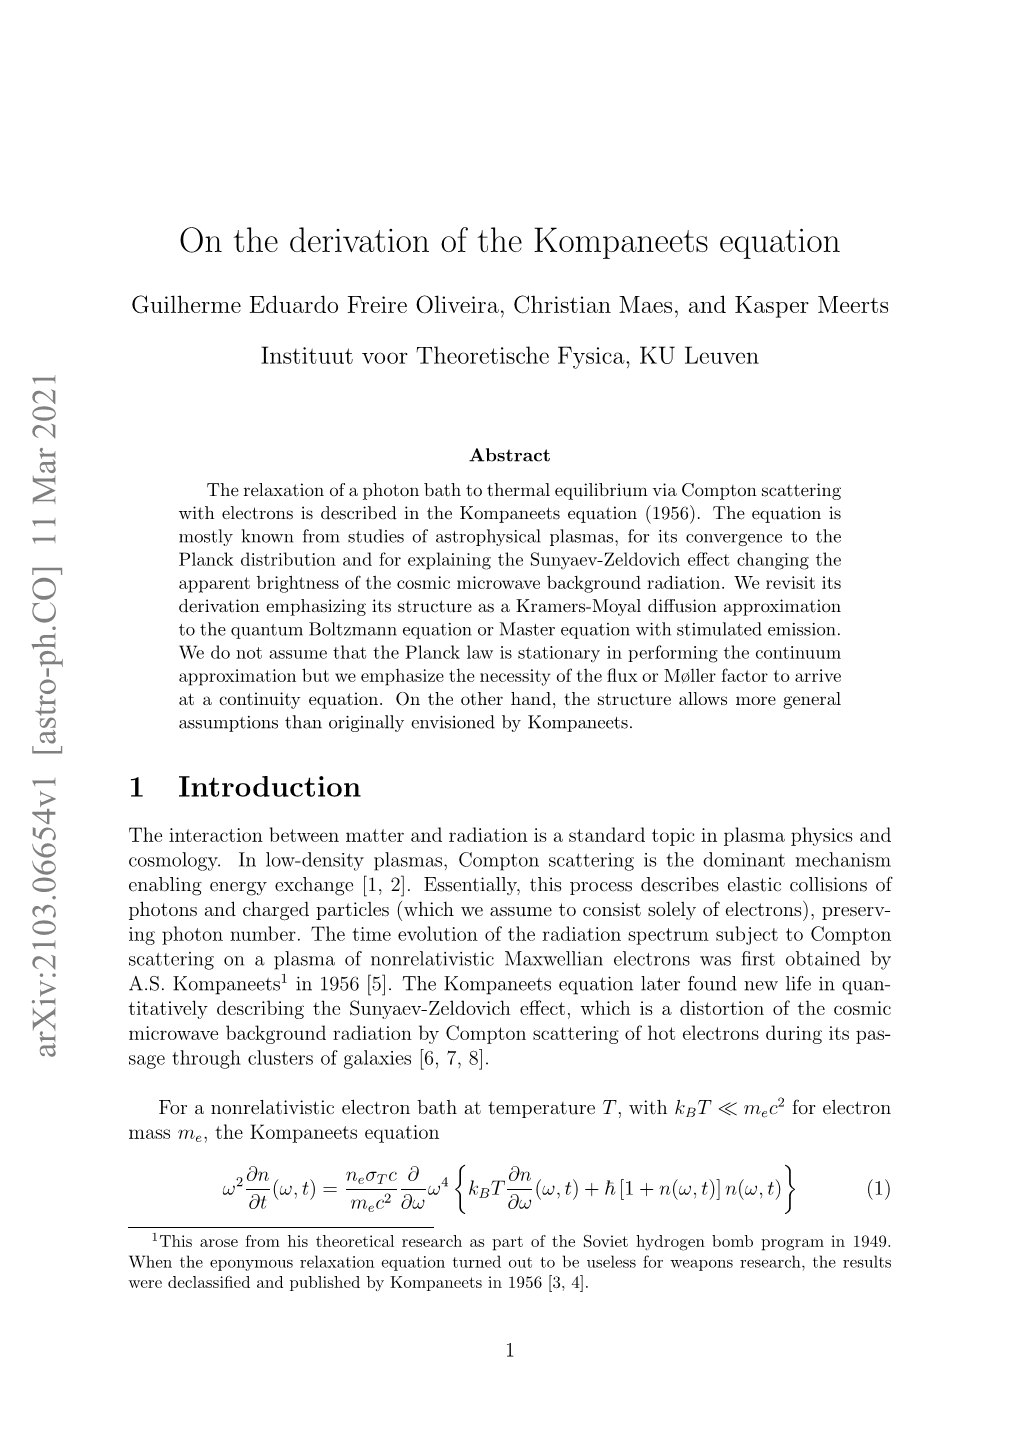 On the Derivation of the Kompaneets Equation, We Are Motivated by Exploring Possible Exten- Sions